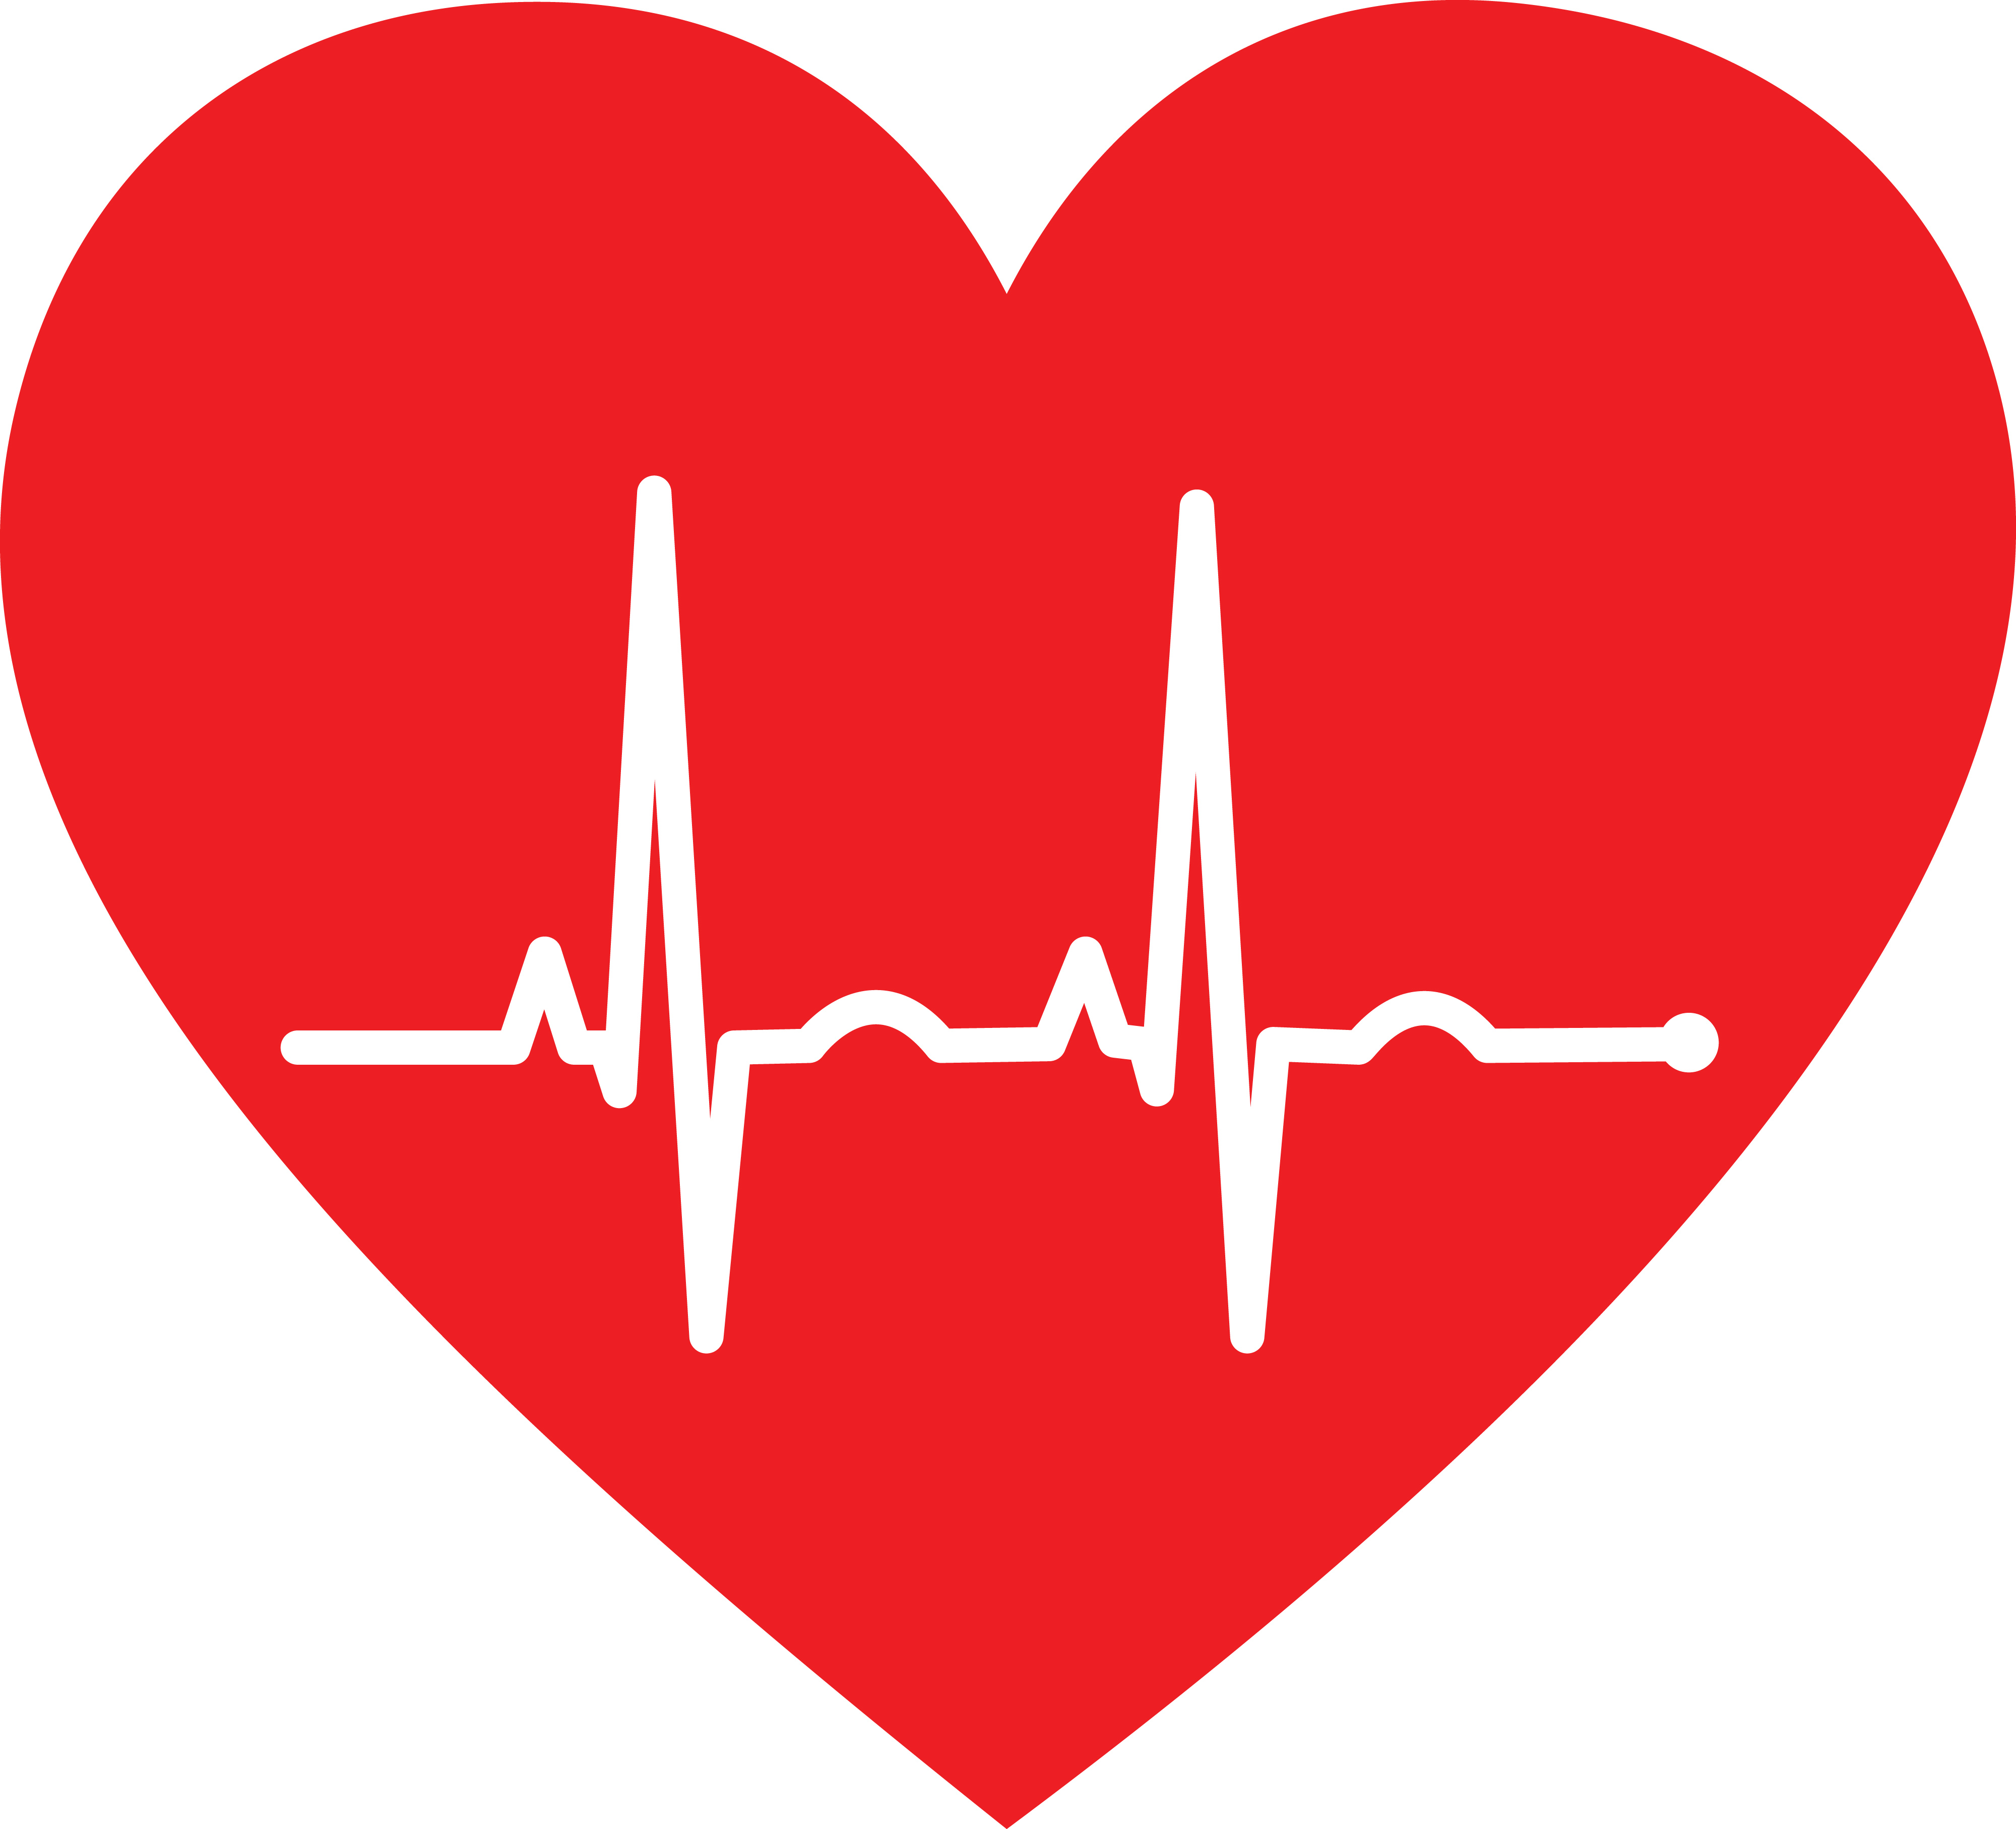 Download Free Clipart Of A Heart with an ekg